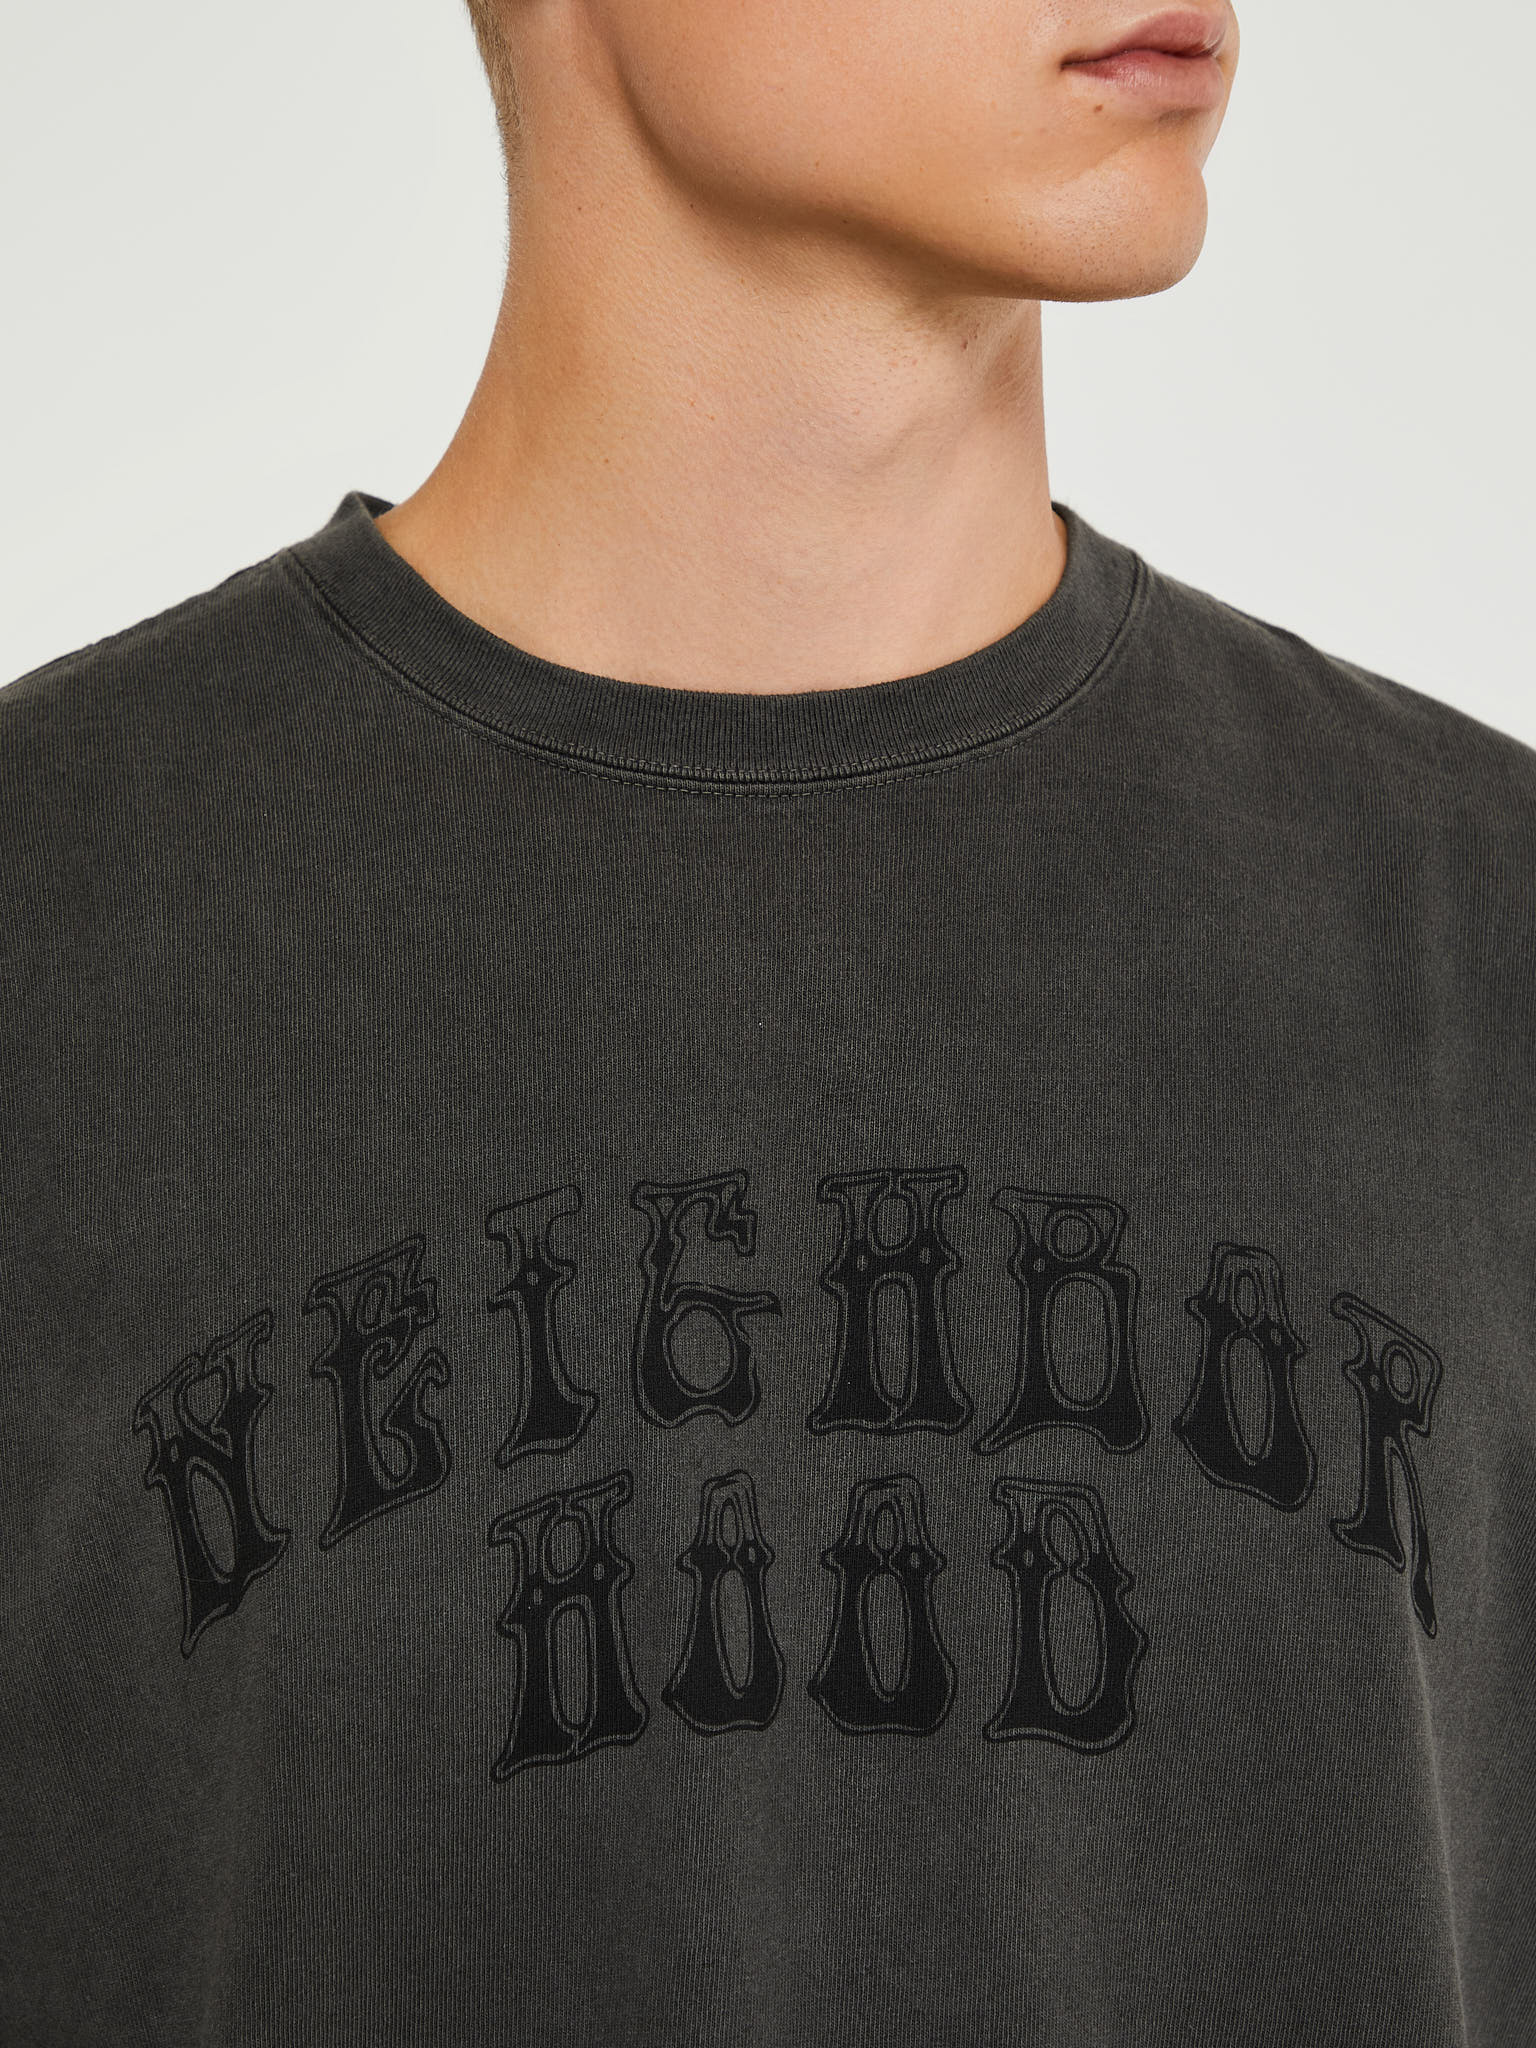 Pigment Dyed Crewneck T-Shirt in Black